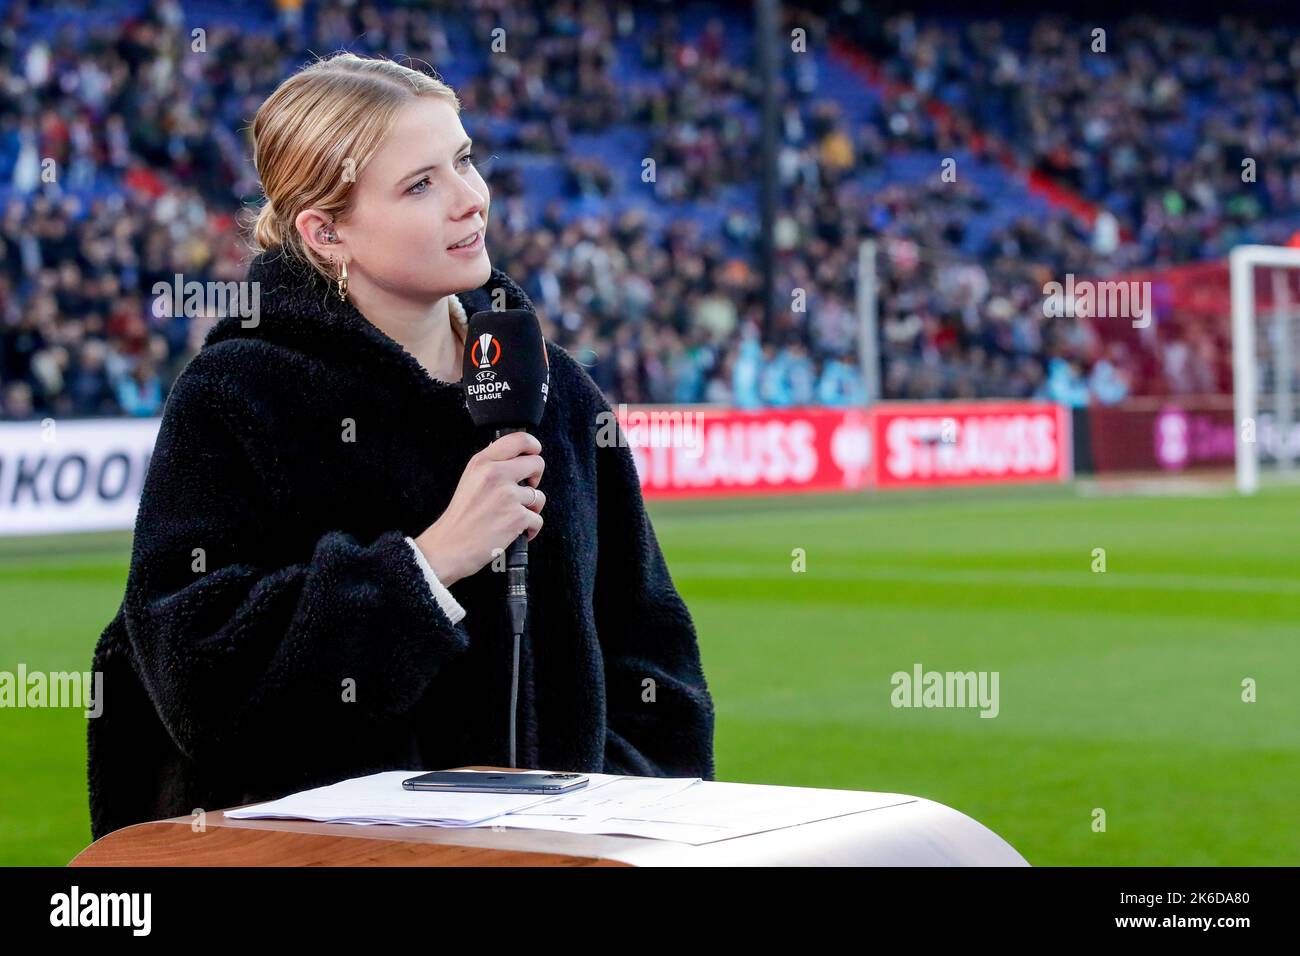 ROTTERDAM, NETHERLANDS - OCTOBER 13: Presentators Noa Vahle during the UEFA Europa League - Group F match between Feyenoord Rotterdam and FC Midtjylland at De Kuip on October 13, 2022 in Rotterdam, Netherlands (Photo by Broer van den Boom/Orange Pictures) Stock Photo